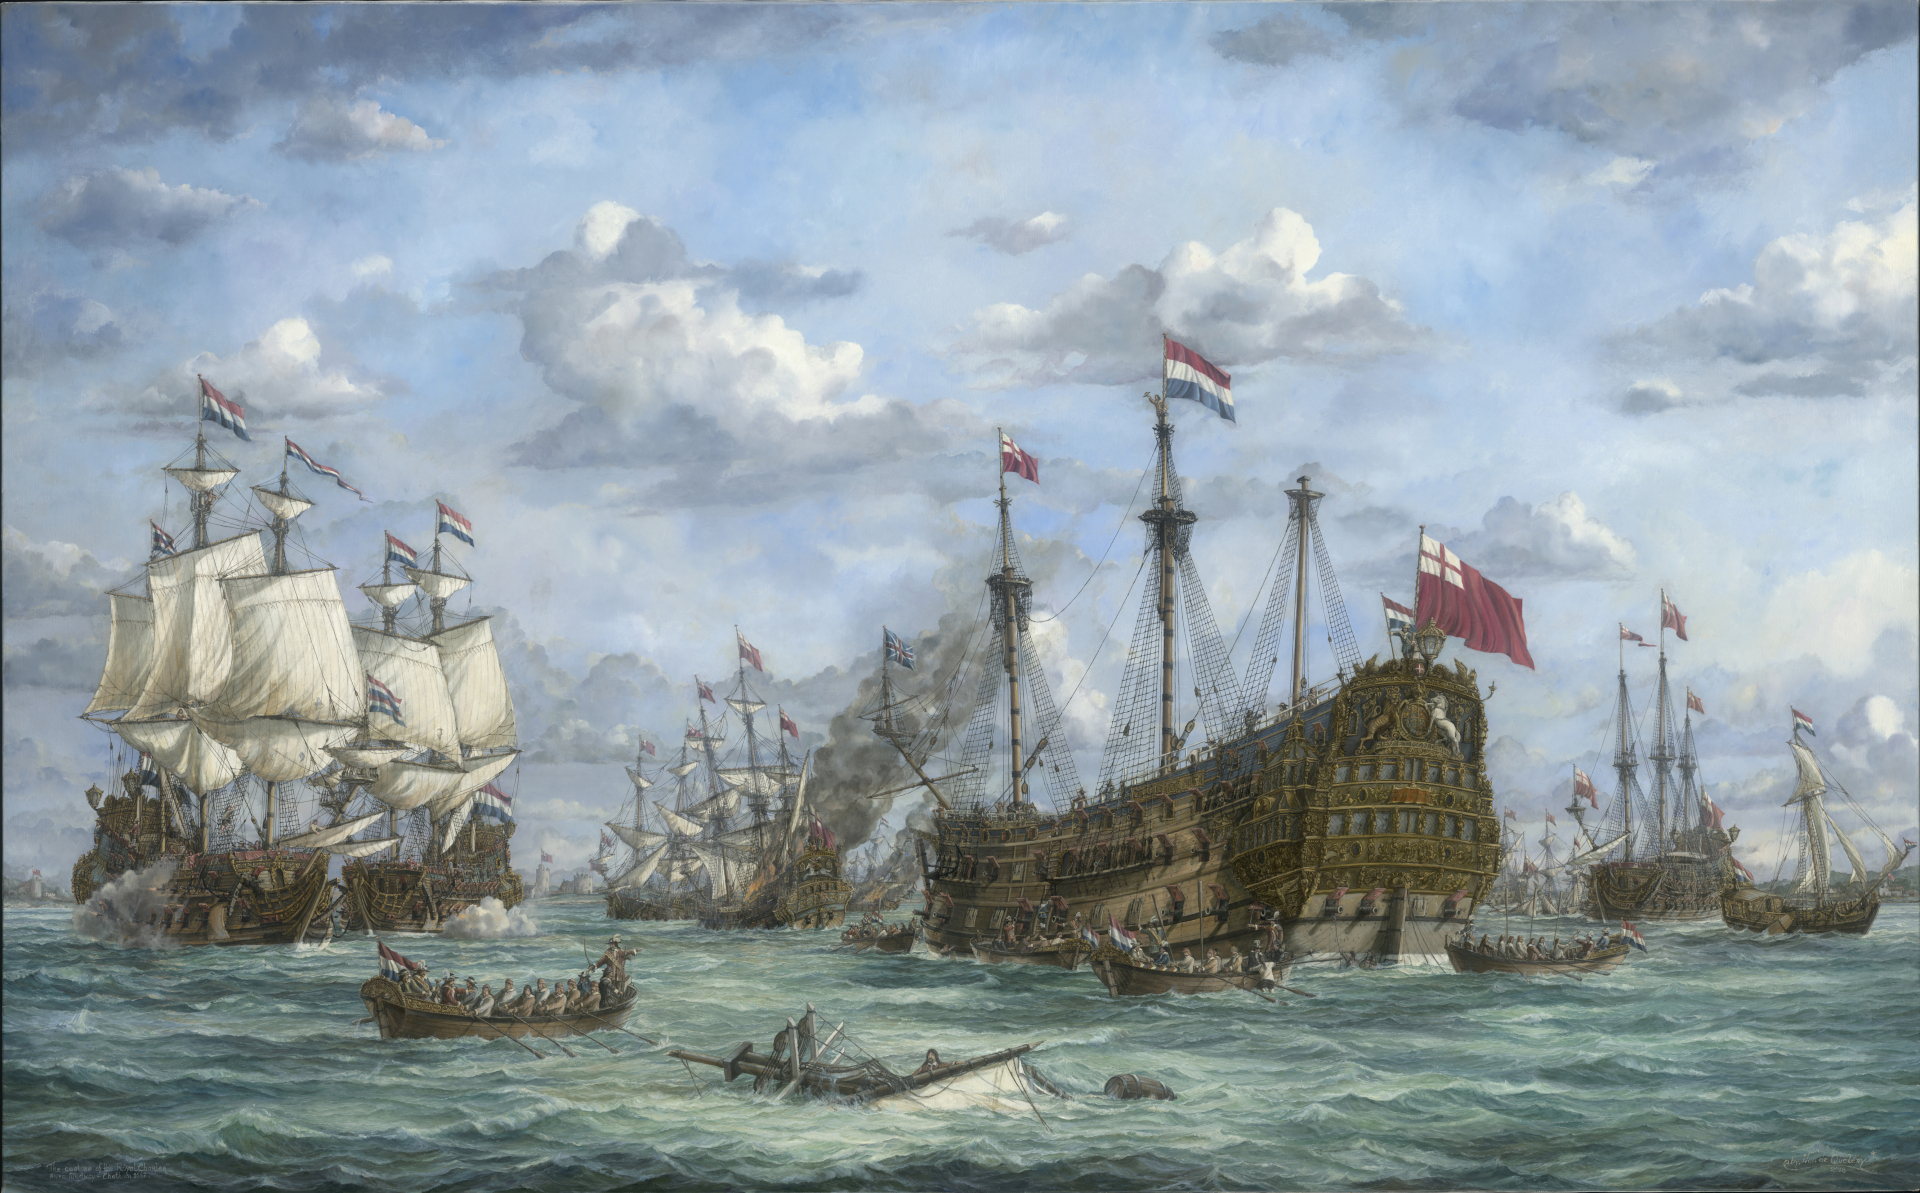 The Raid on the river Medway , Chatham 1667